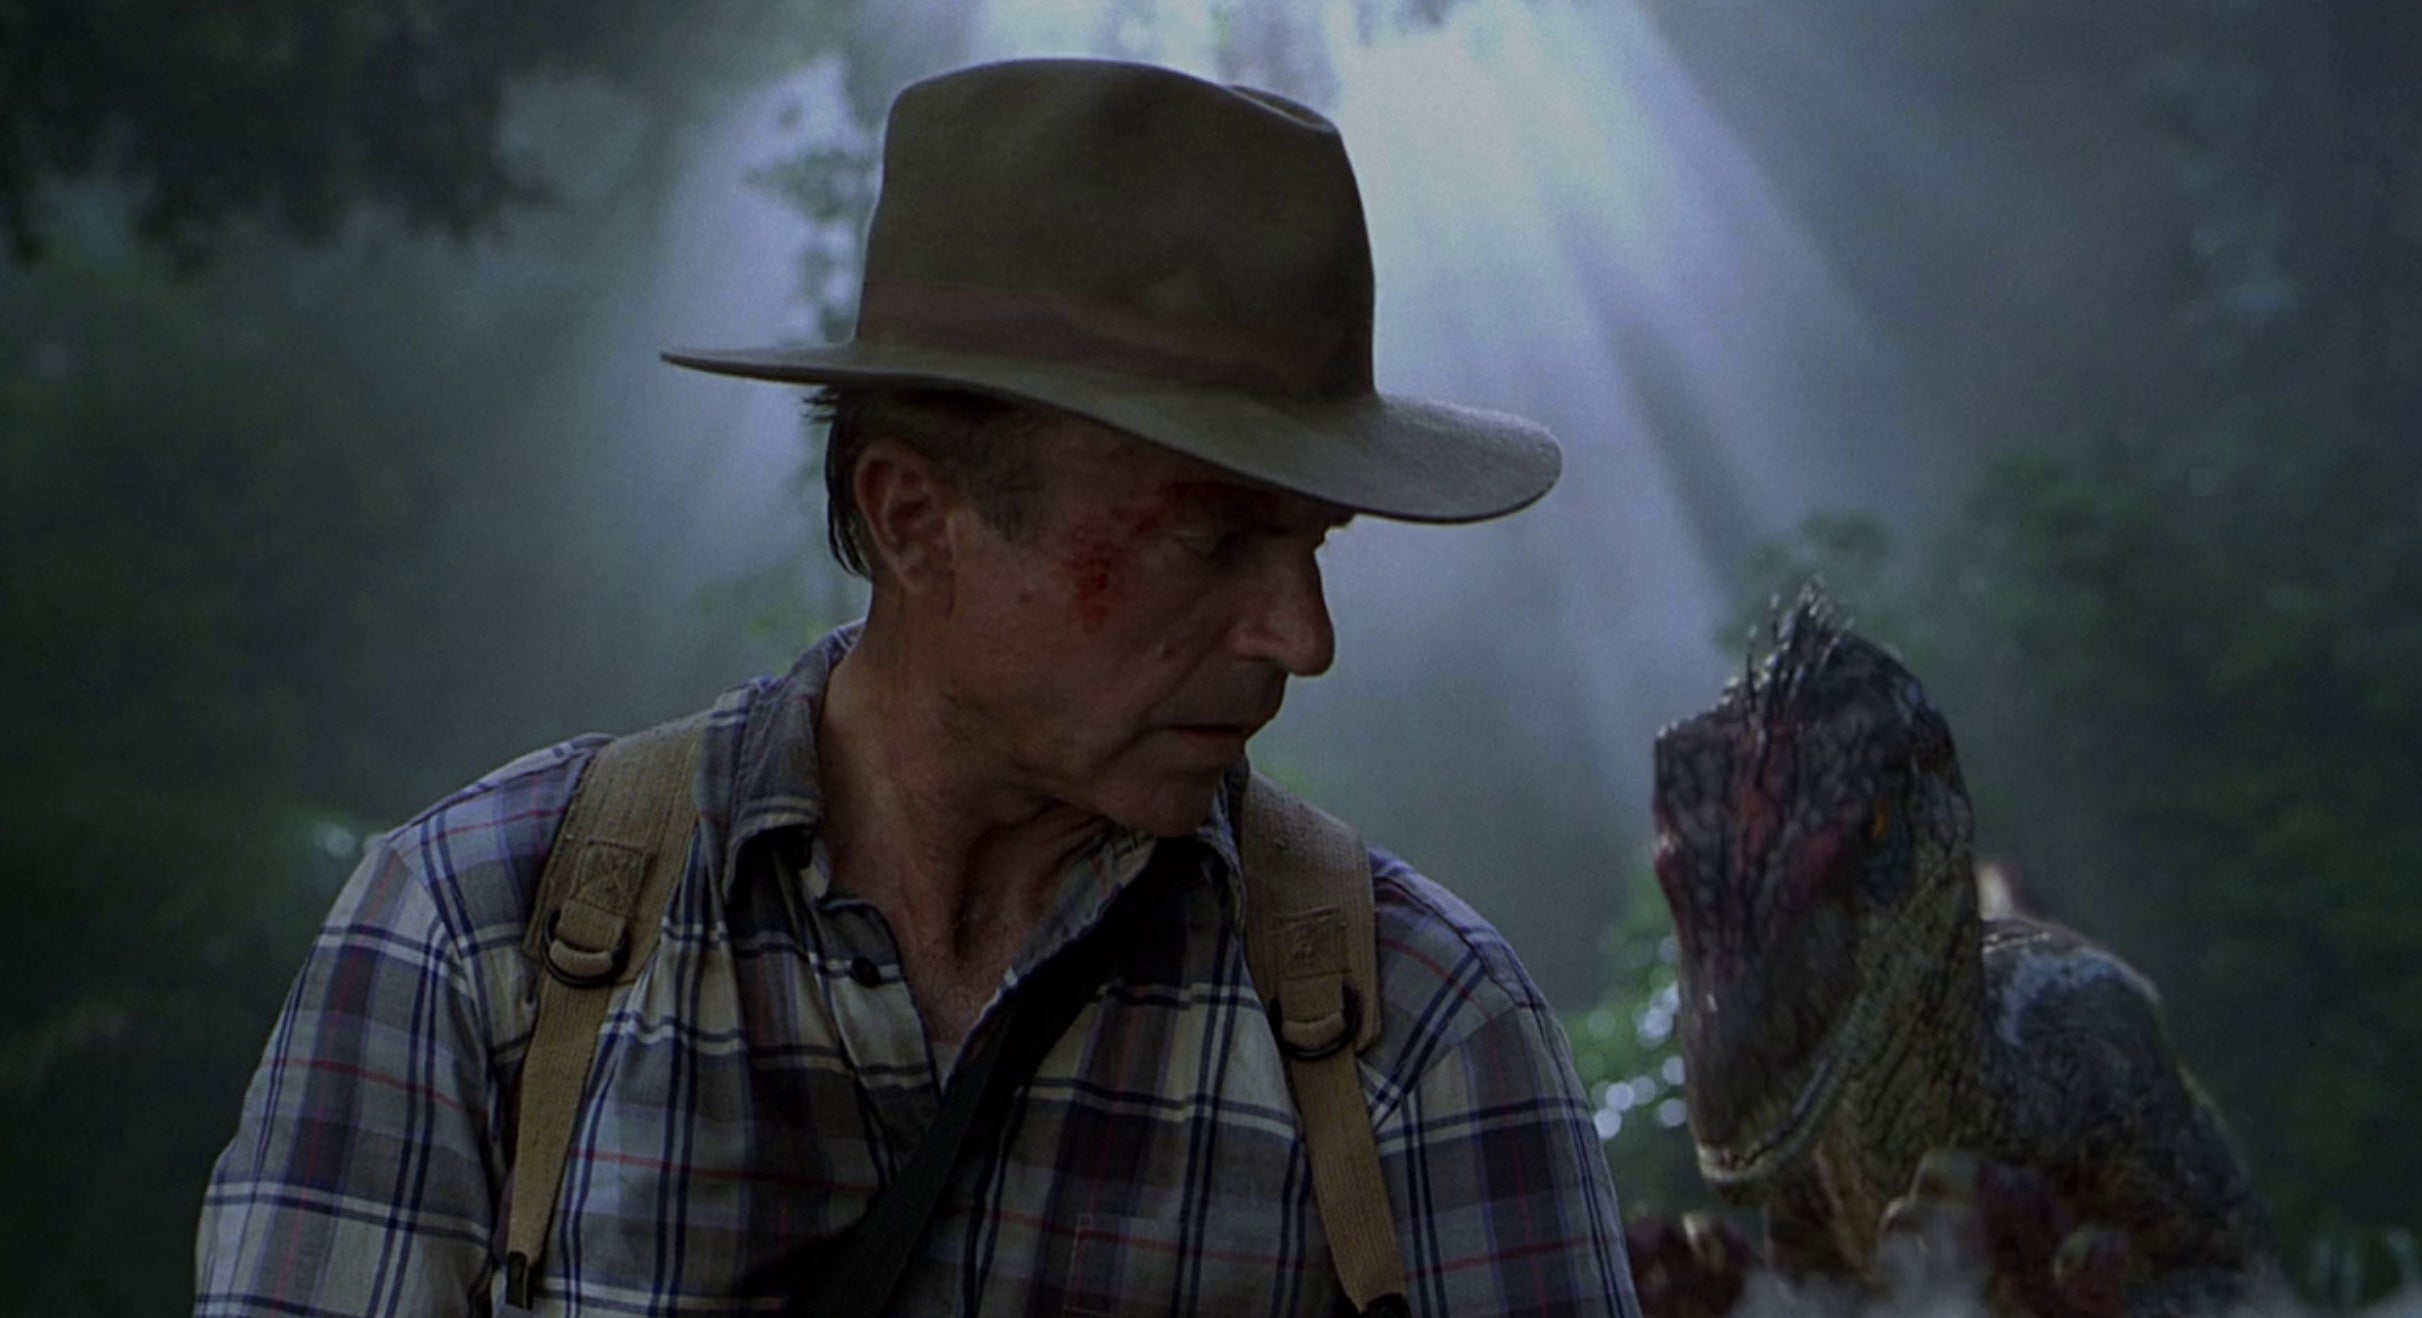 Grant as seen in Jurassic Park III. (Image: Universal)